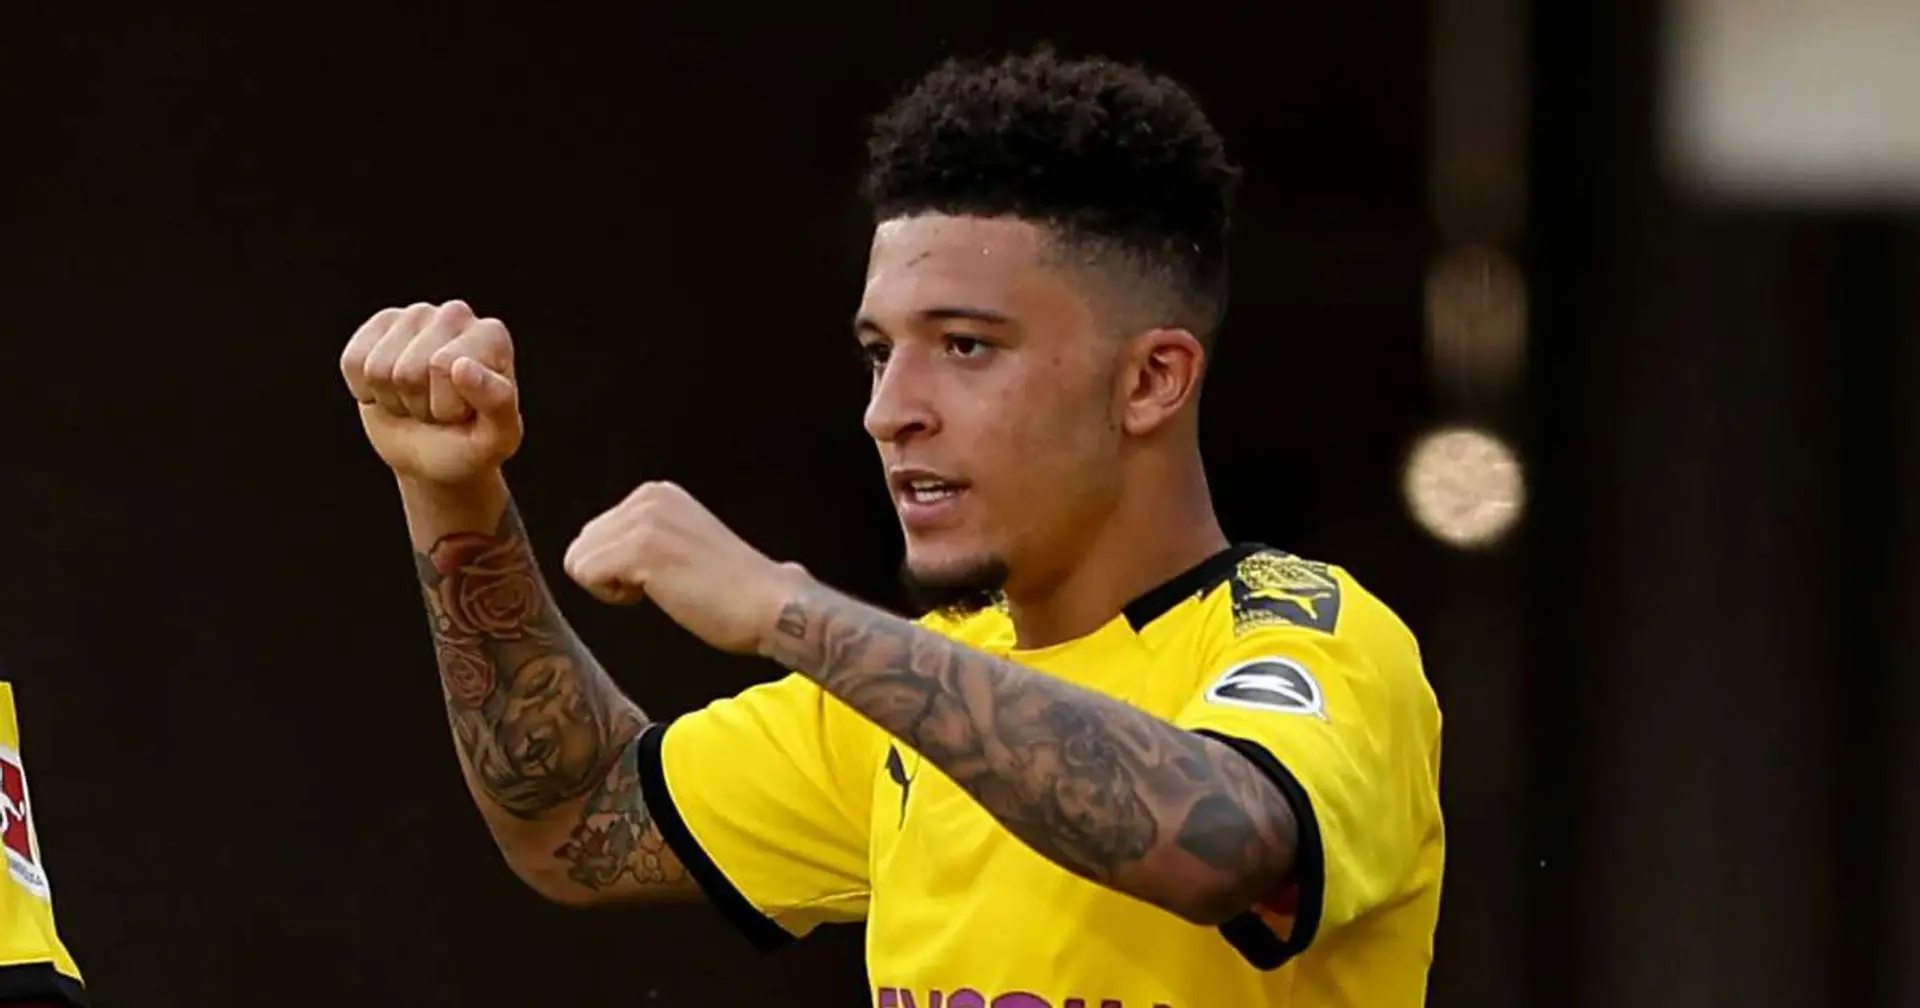 MEN: Sancho visited Carrington during his time in Manchester